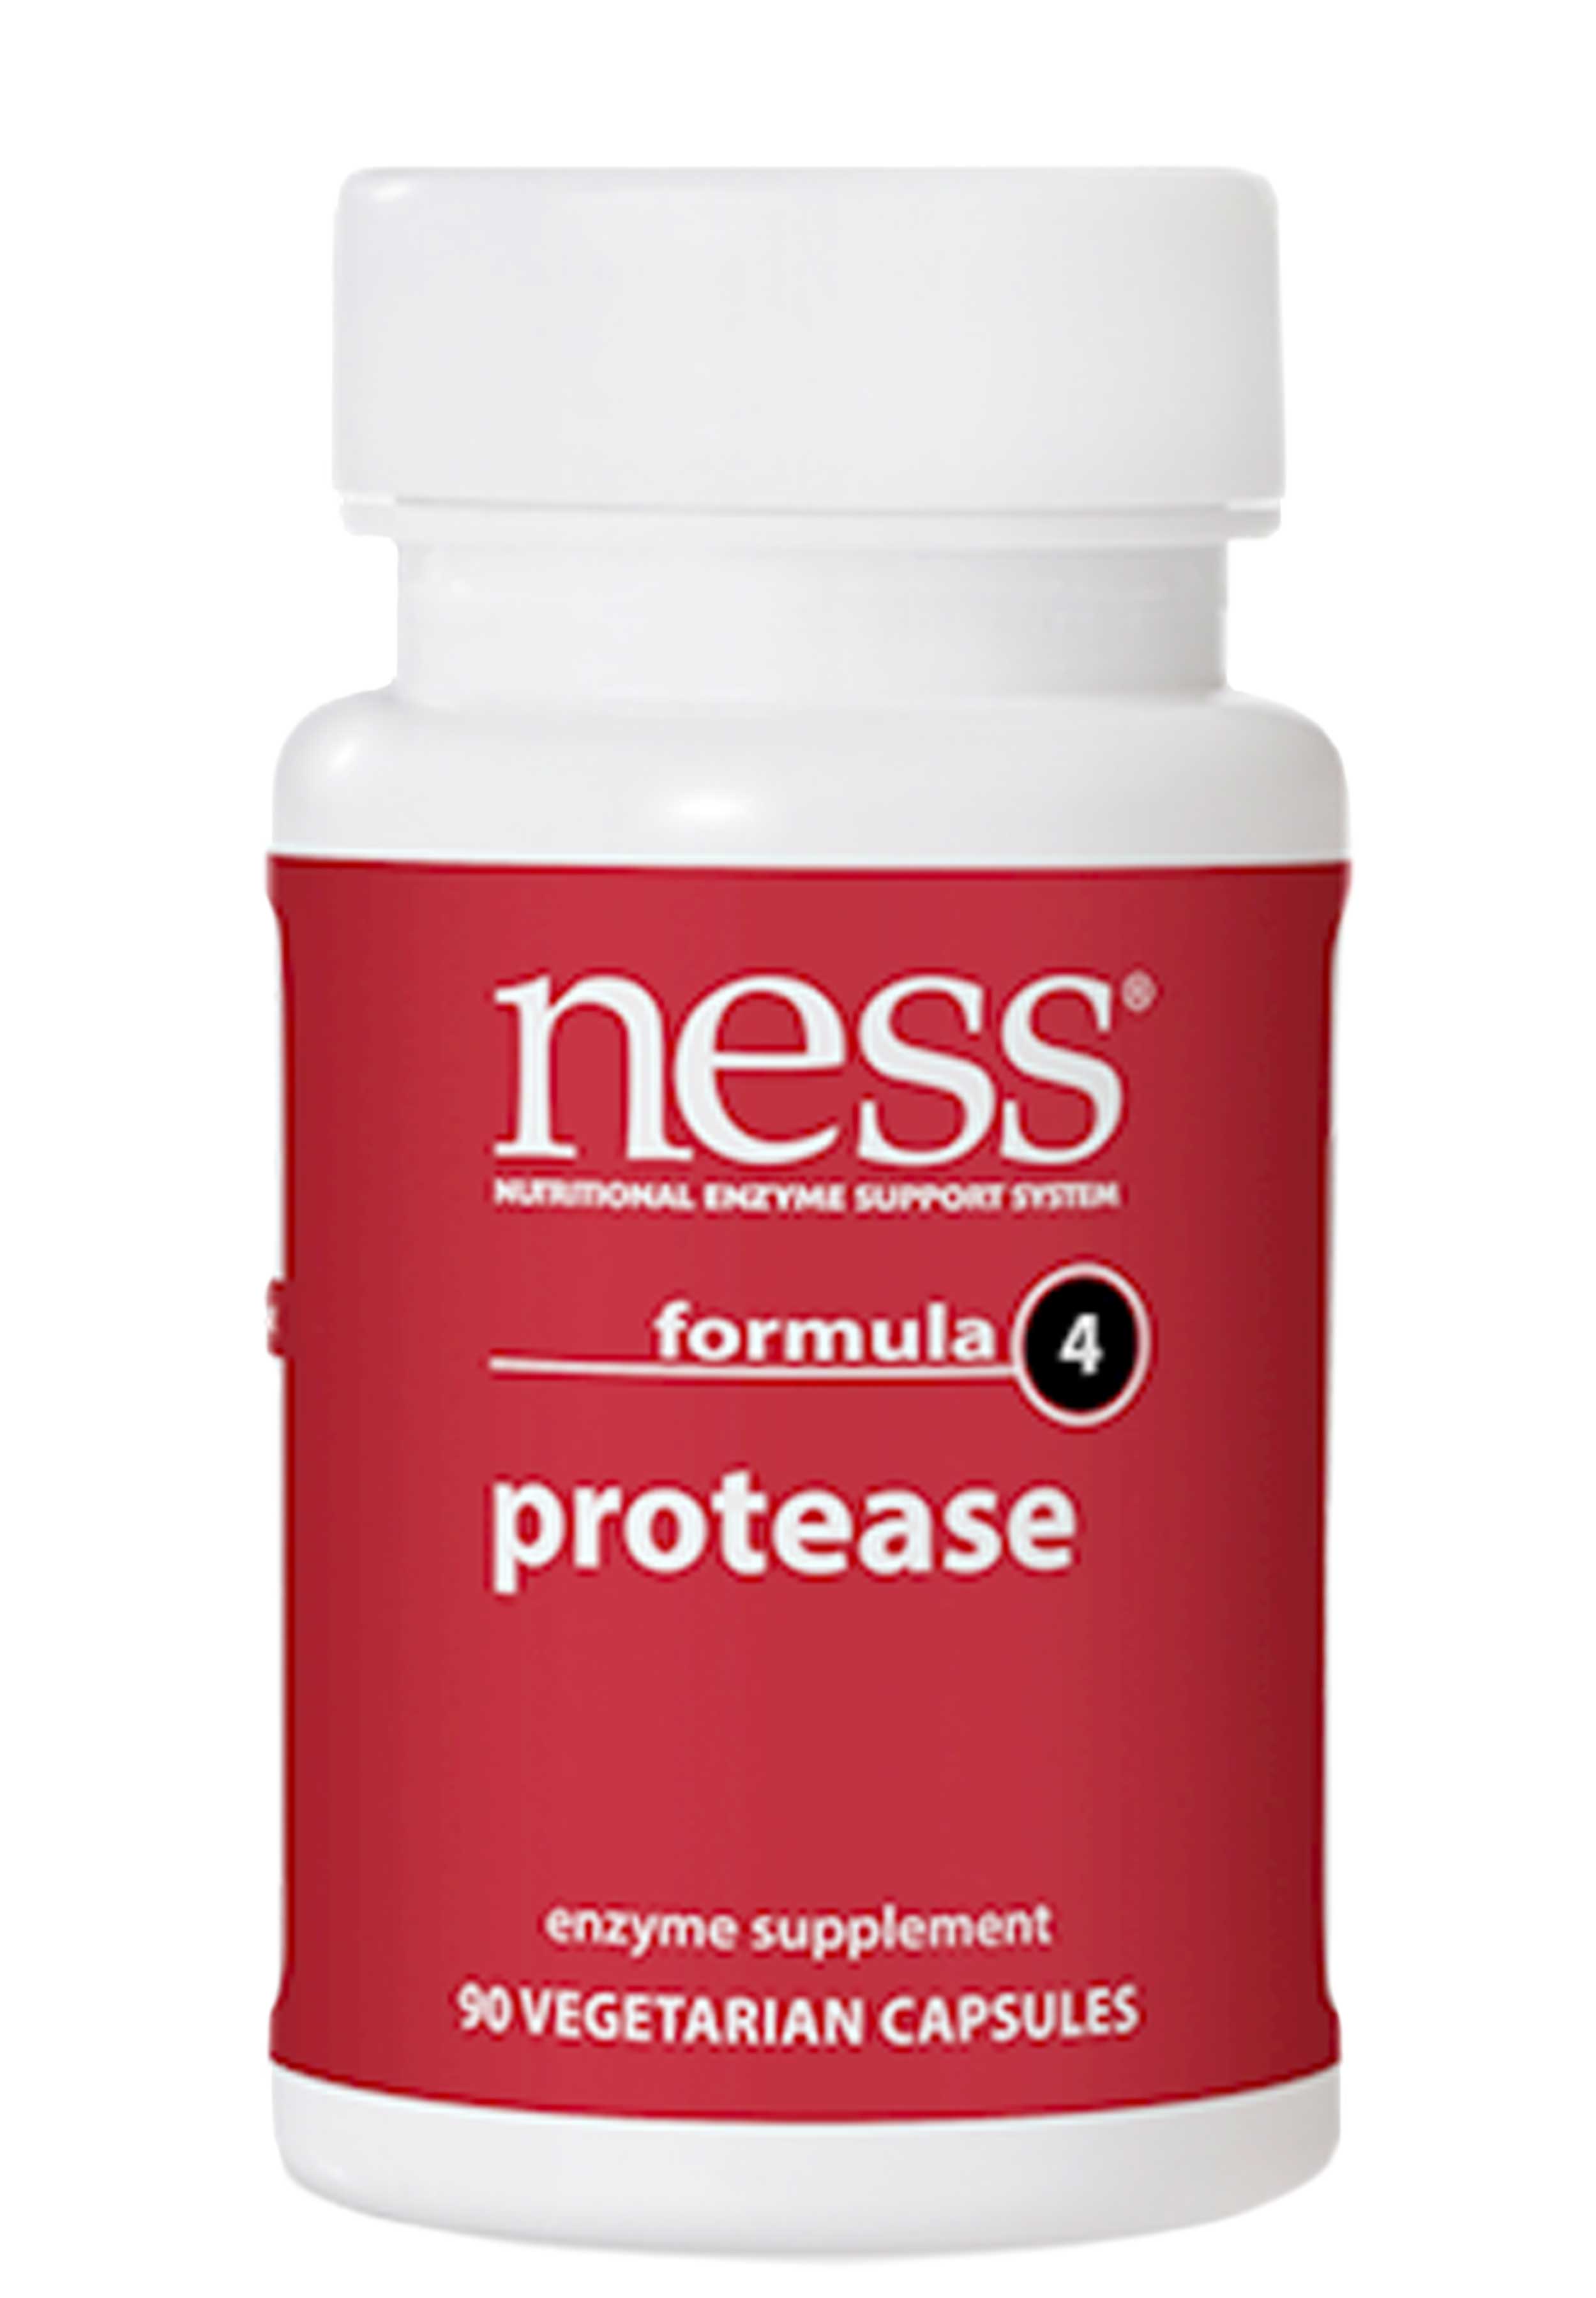 Ness Enzymes Protease Formula 4